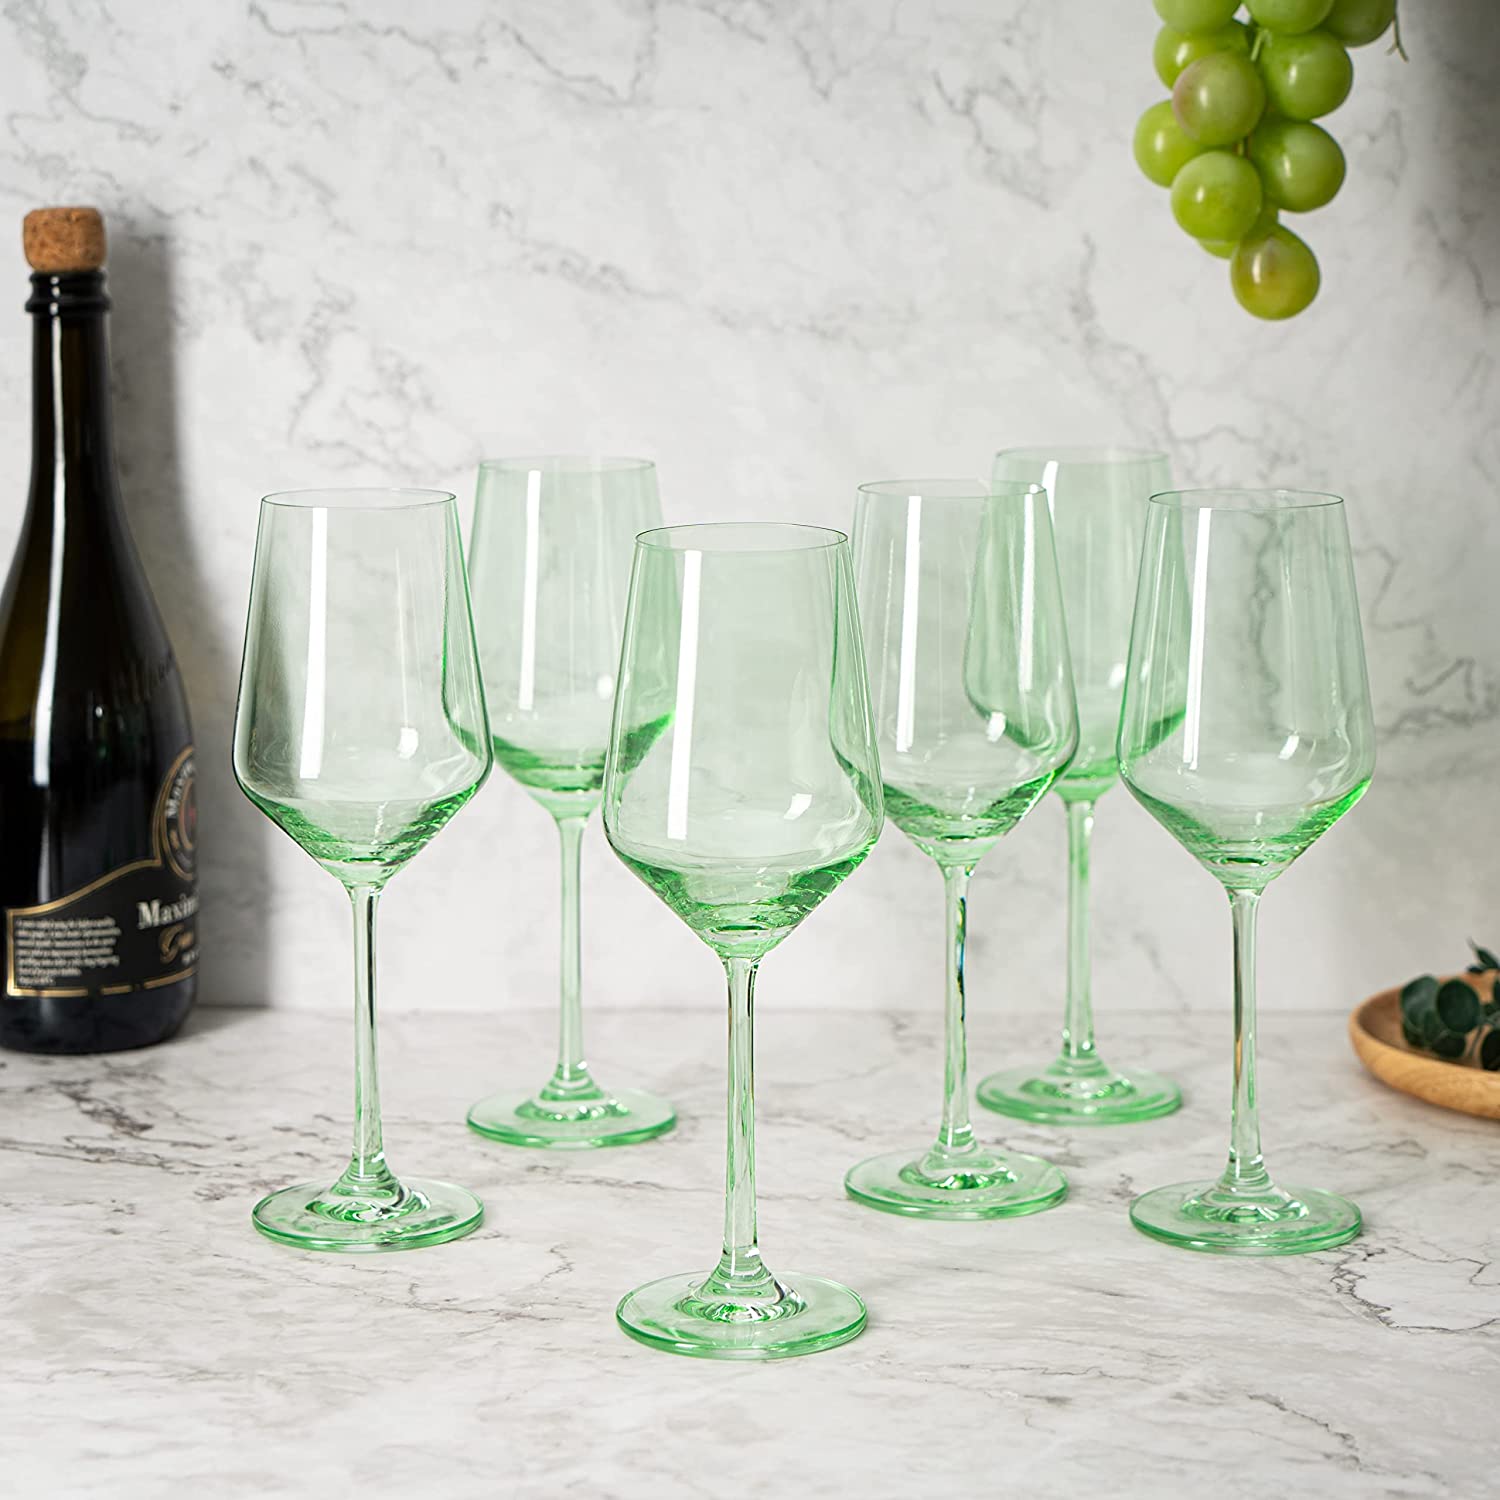 Set of 6 Smoked Square Shaped Wine Glasses